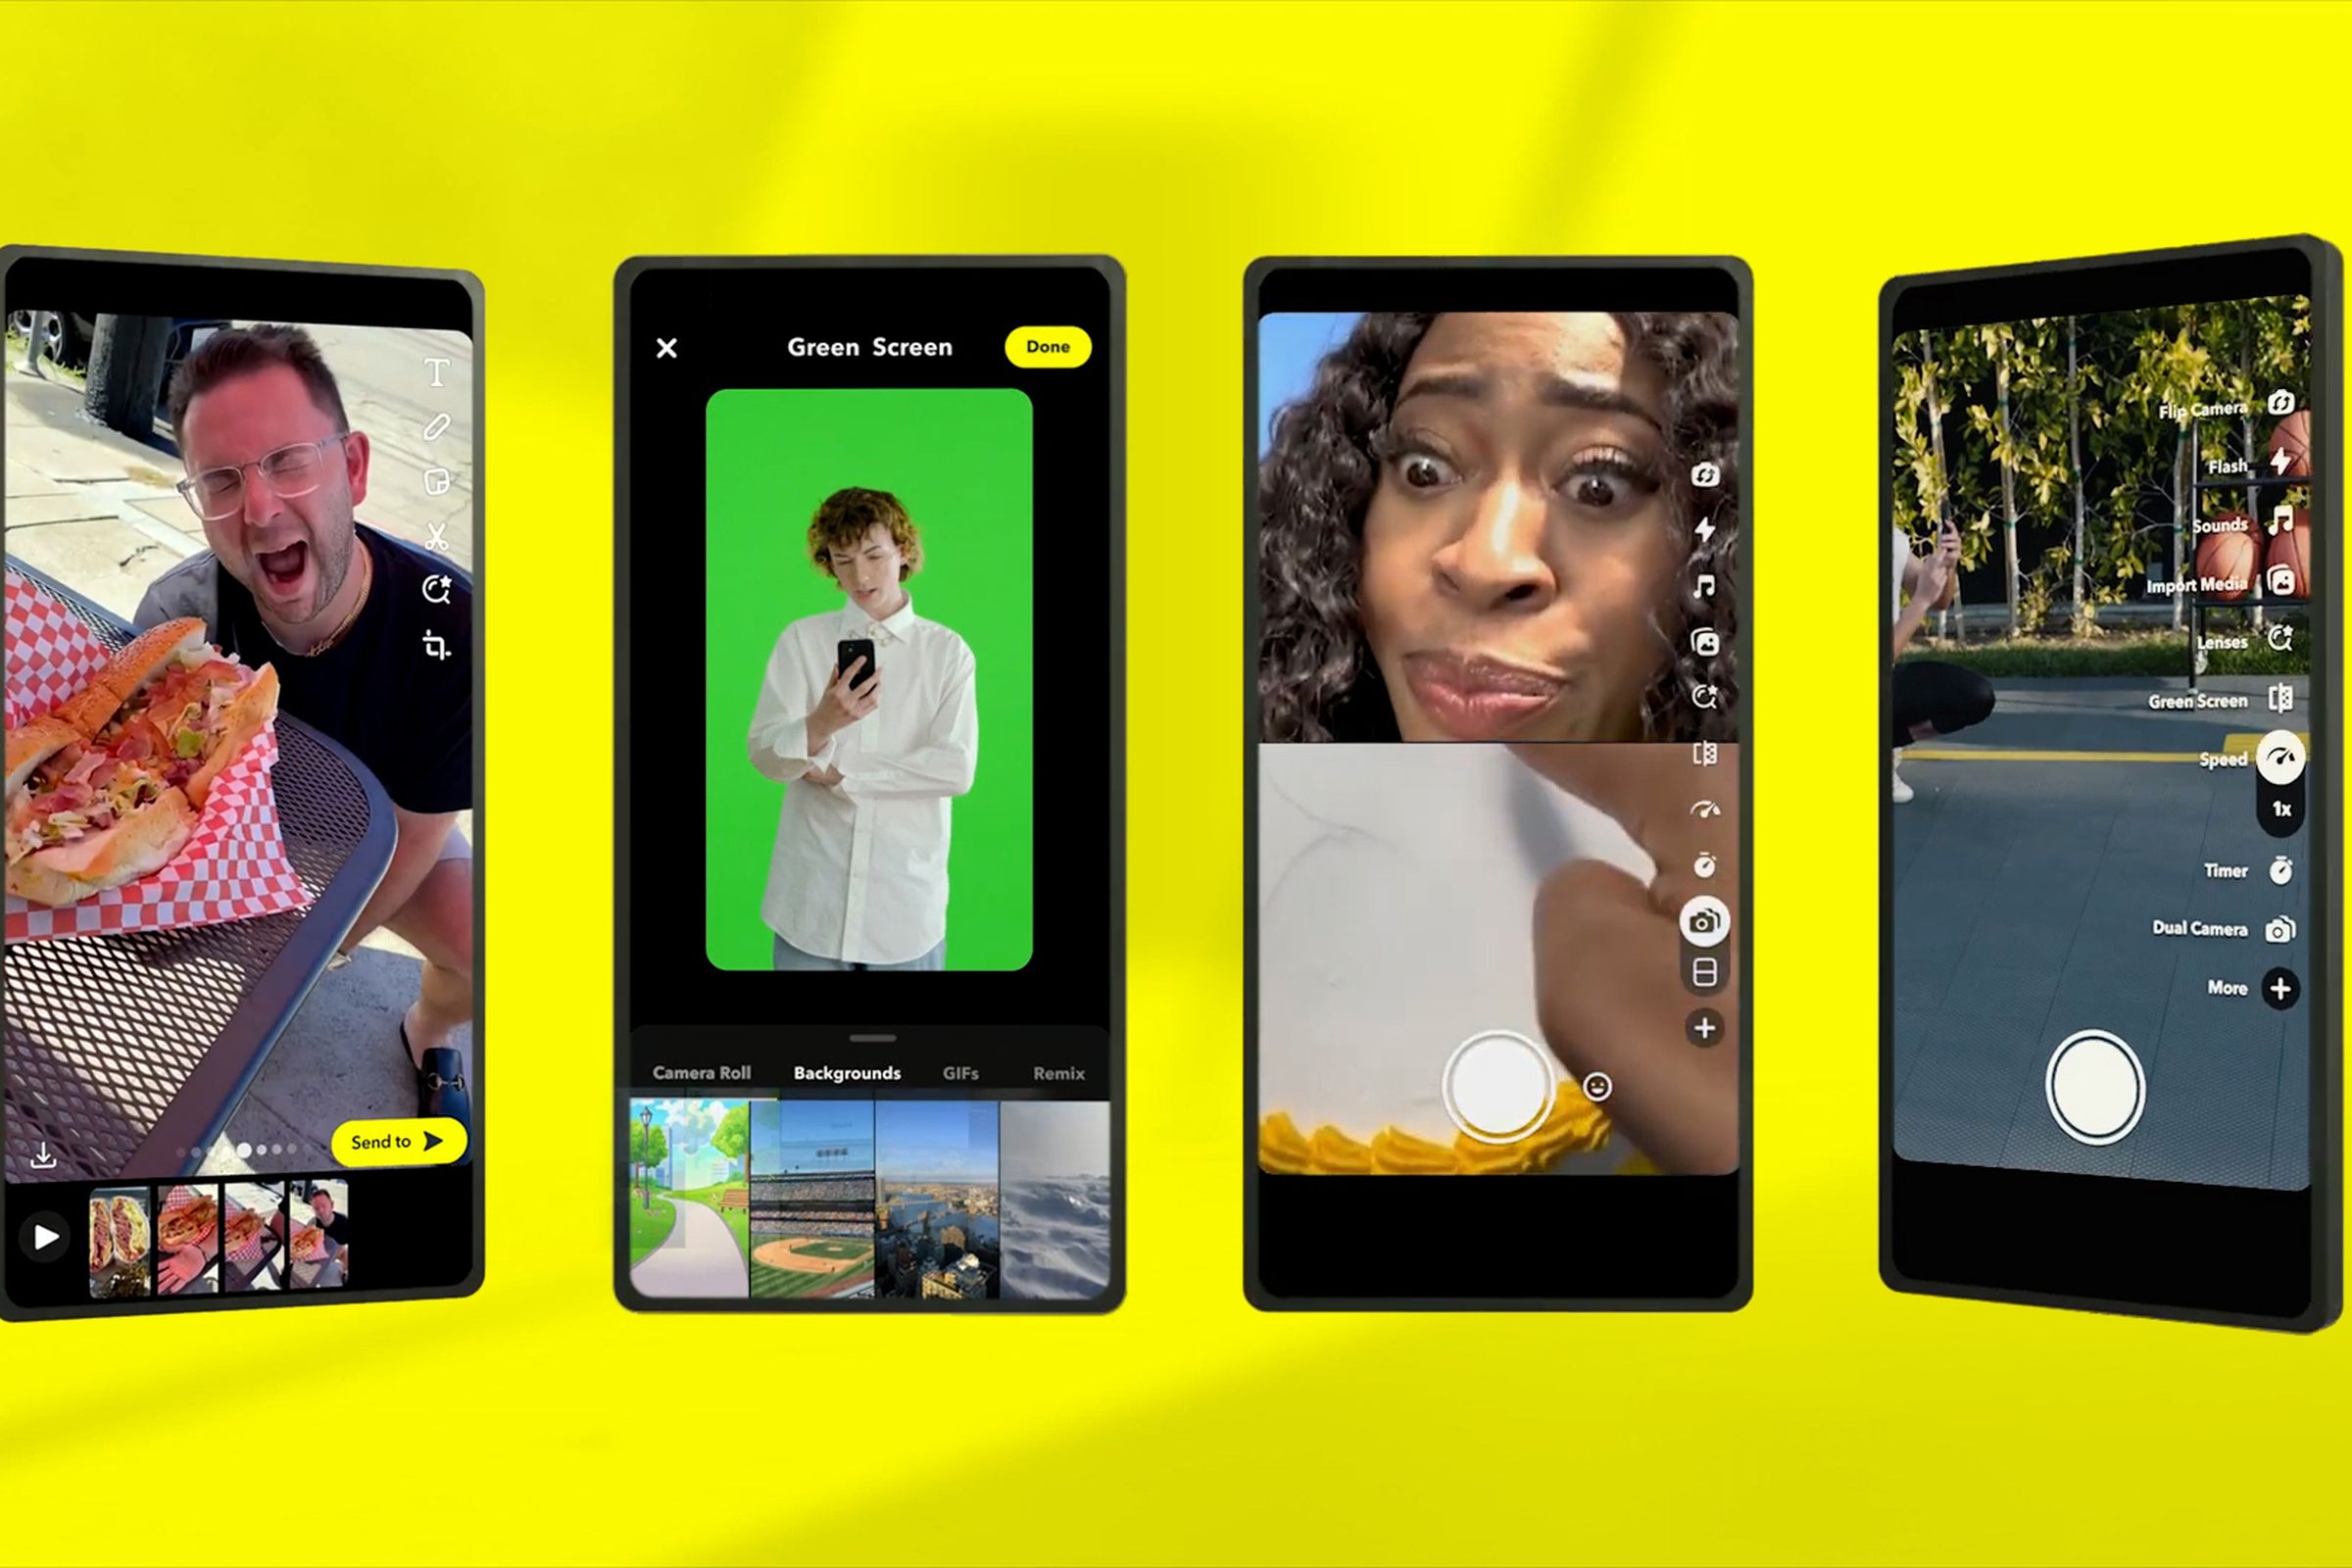 A series of Snapchat screens showing new Director Mode features like green screen, dual camera, and other editing tools.